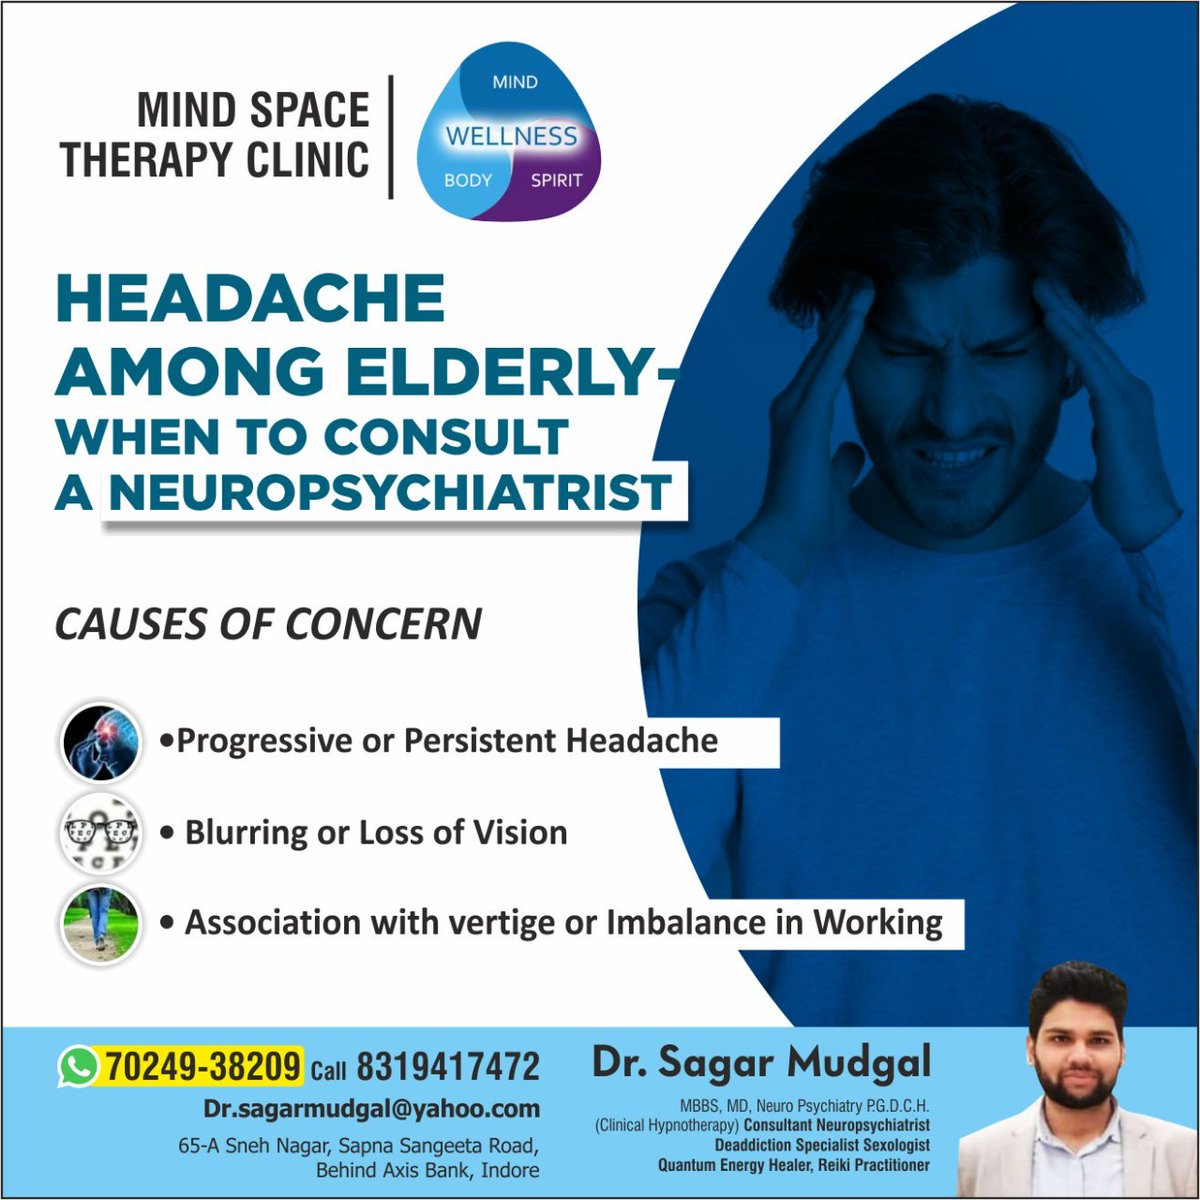 Headache Among Elderly - When to Consult a NEUROPSYCHIATRIST?
Older people have fewer headaches than younger ones,and women have more headaches than men throughout their lives.#Psychiatricissue #Addictionproblem #Headaches #Sleepproblem  #Sexualproblem #OCD #stress #drsagarmudgal